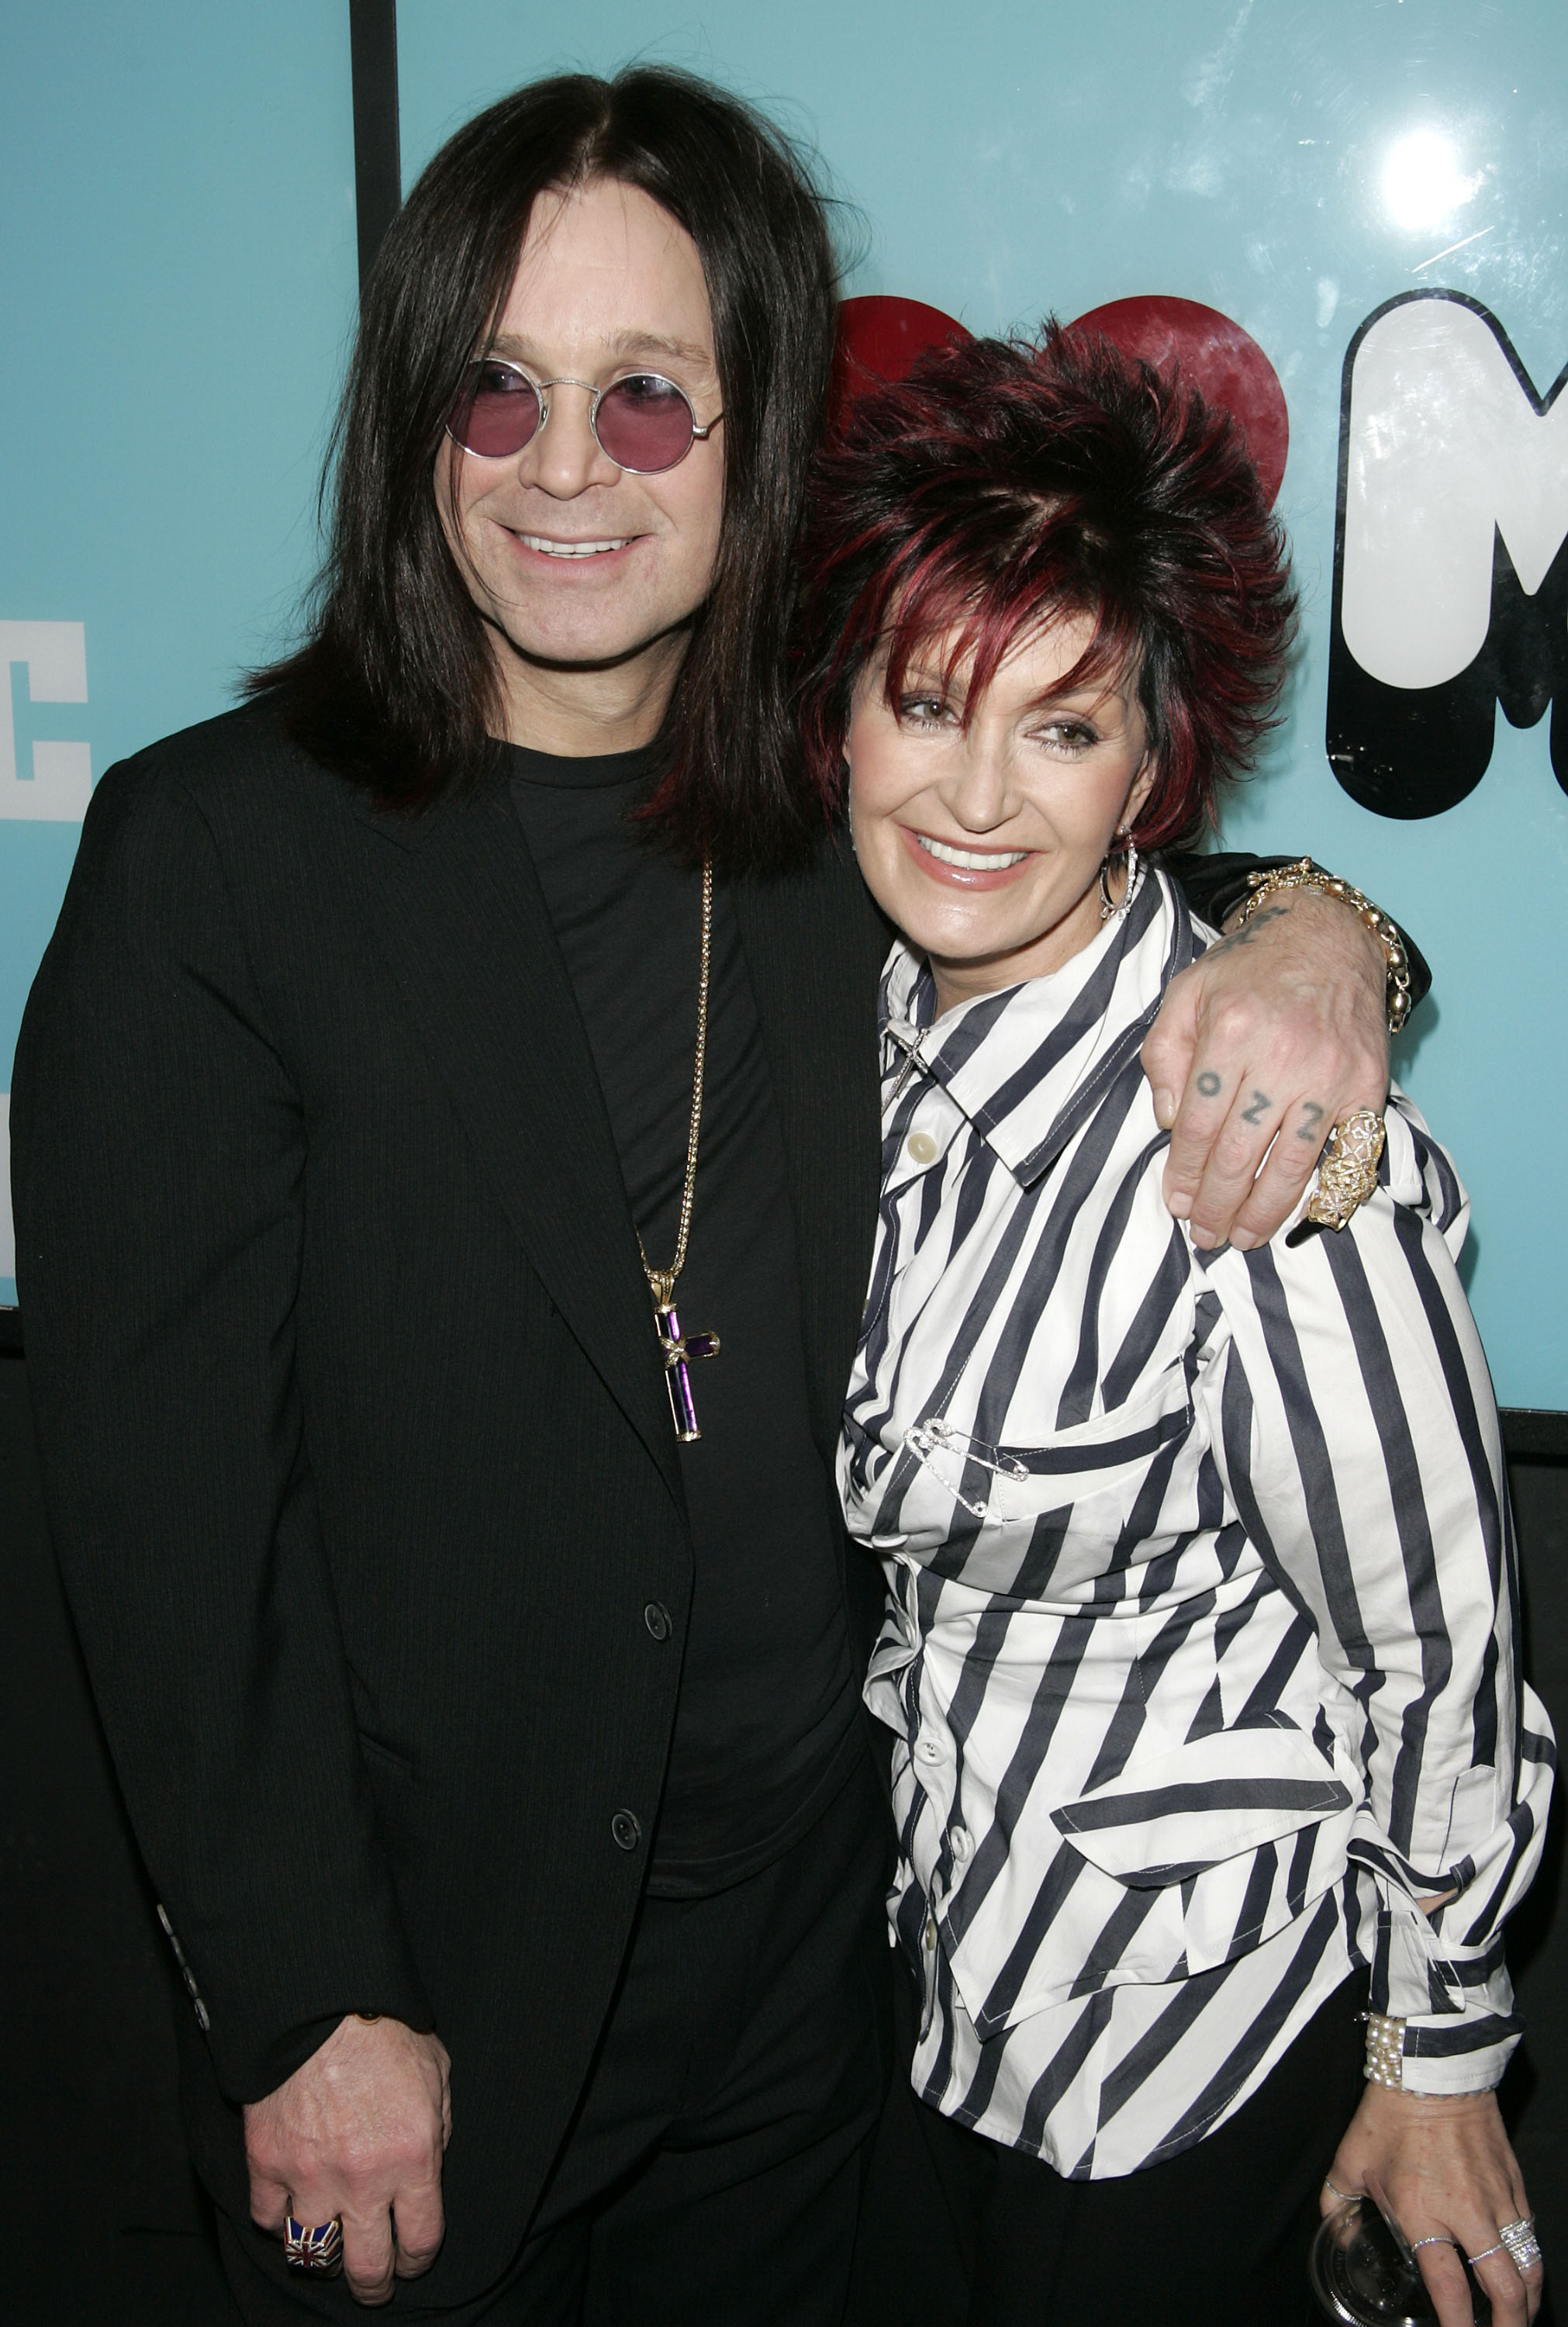 Ozzy Osbourne with Sharon Osbourne at MTV's Total Request Live on March 21, 2005 in New York City. | Source: Getty Images